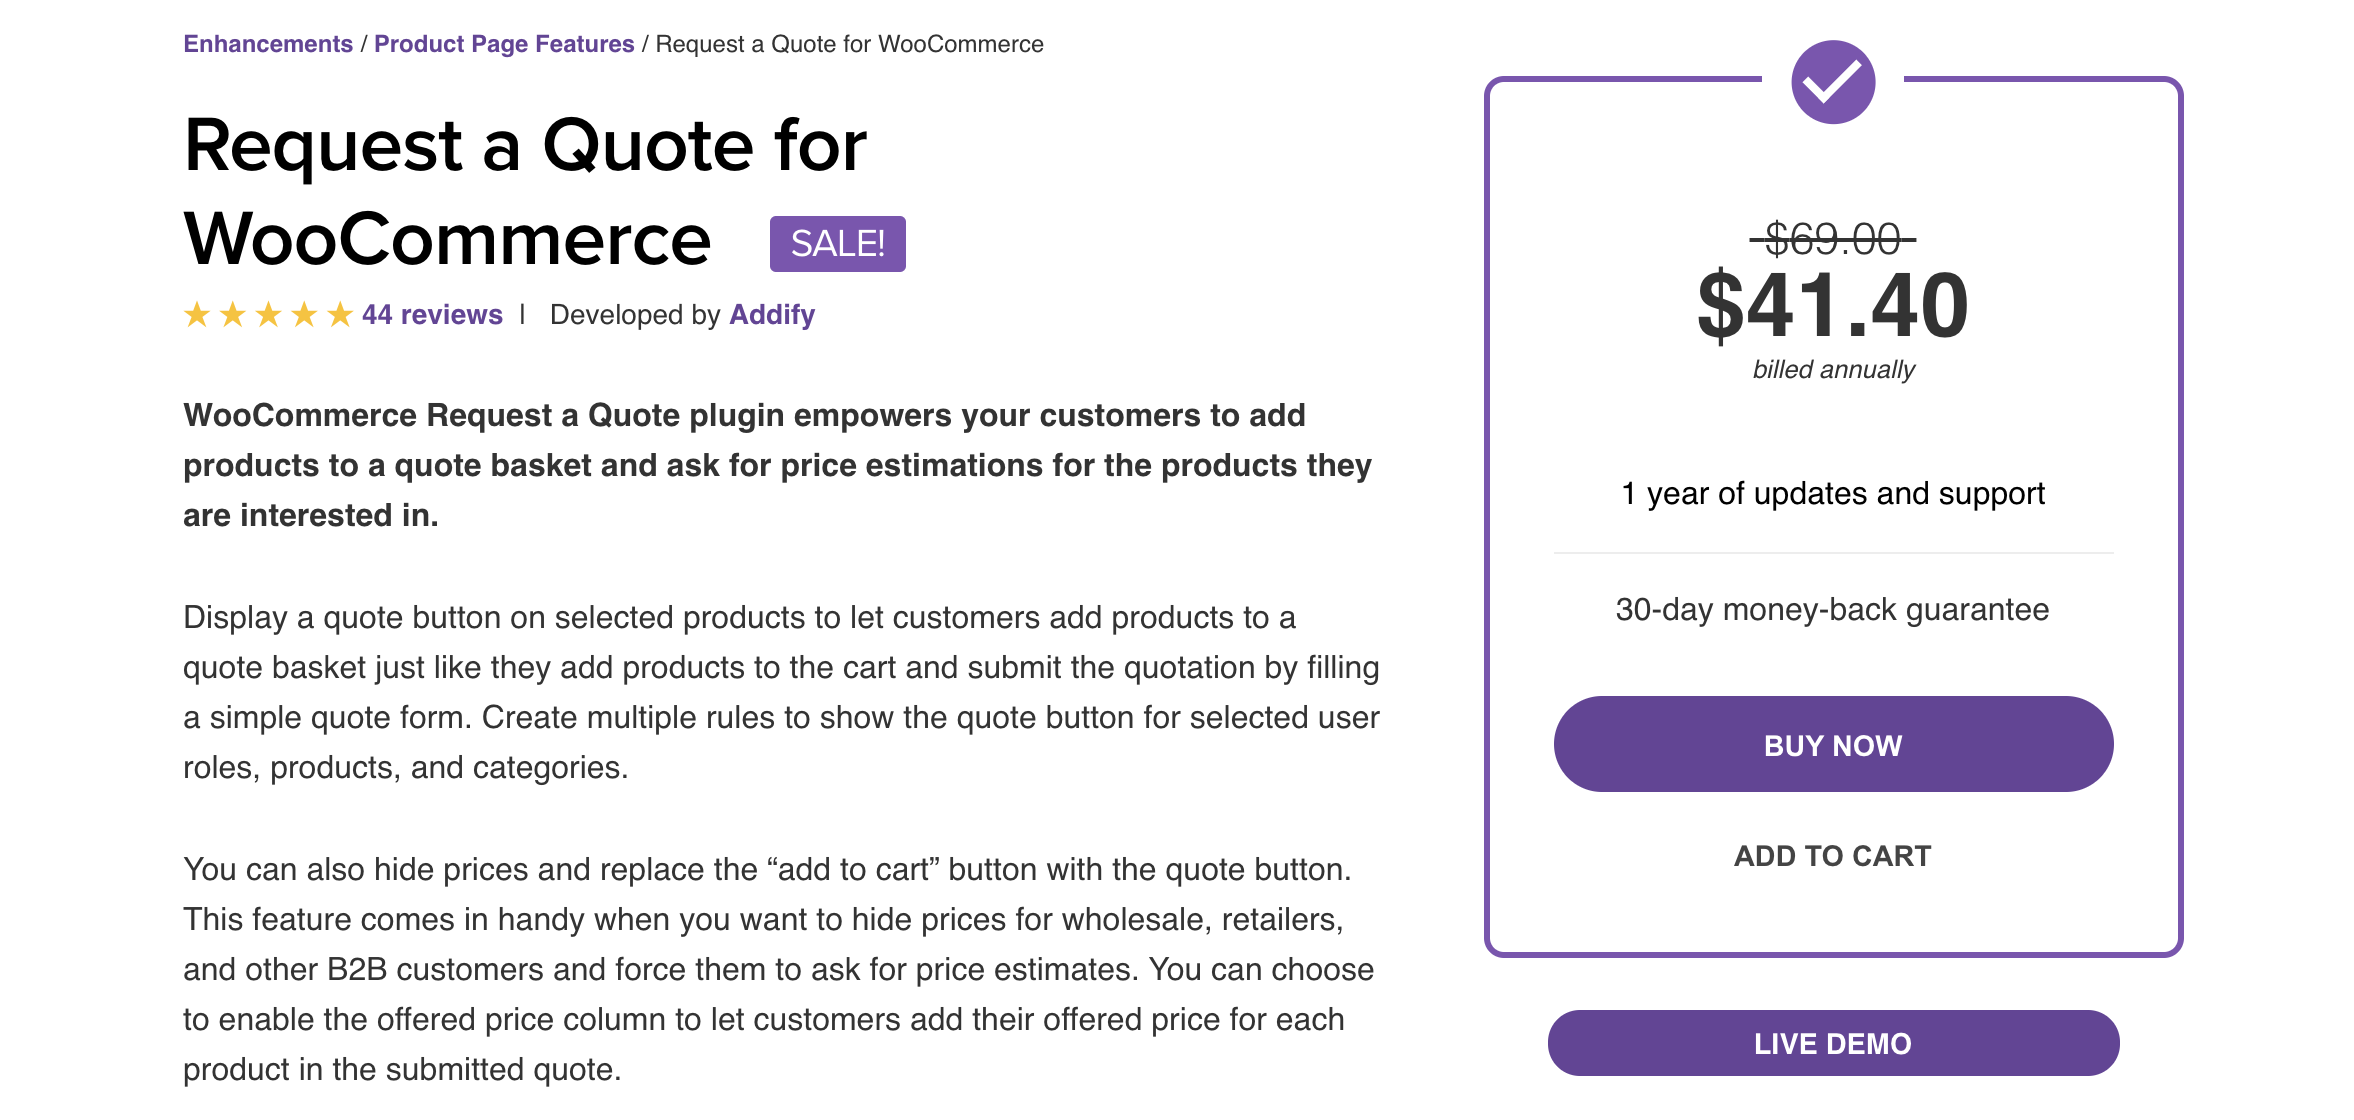 Request a Quote for WooCommerce - WordPress Quote Plugin 